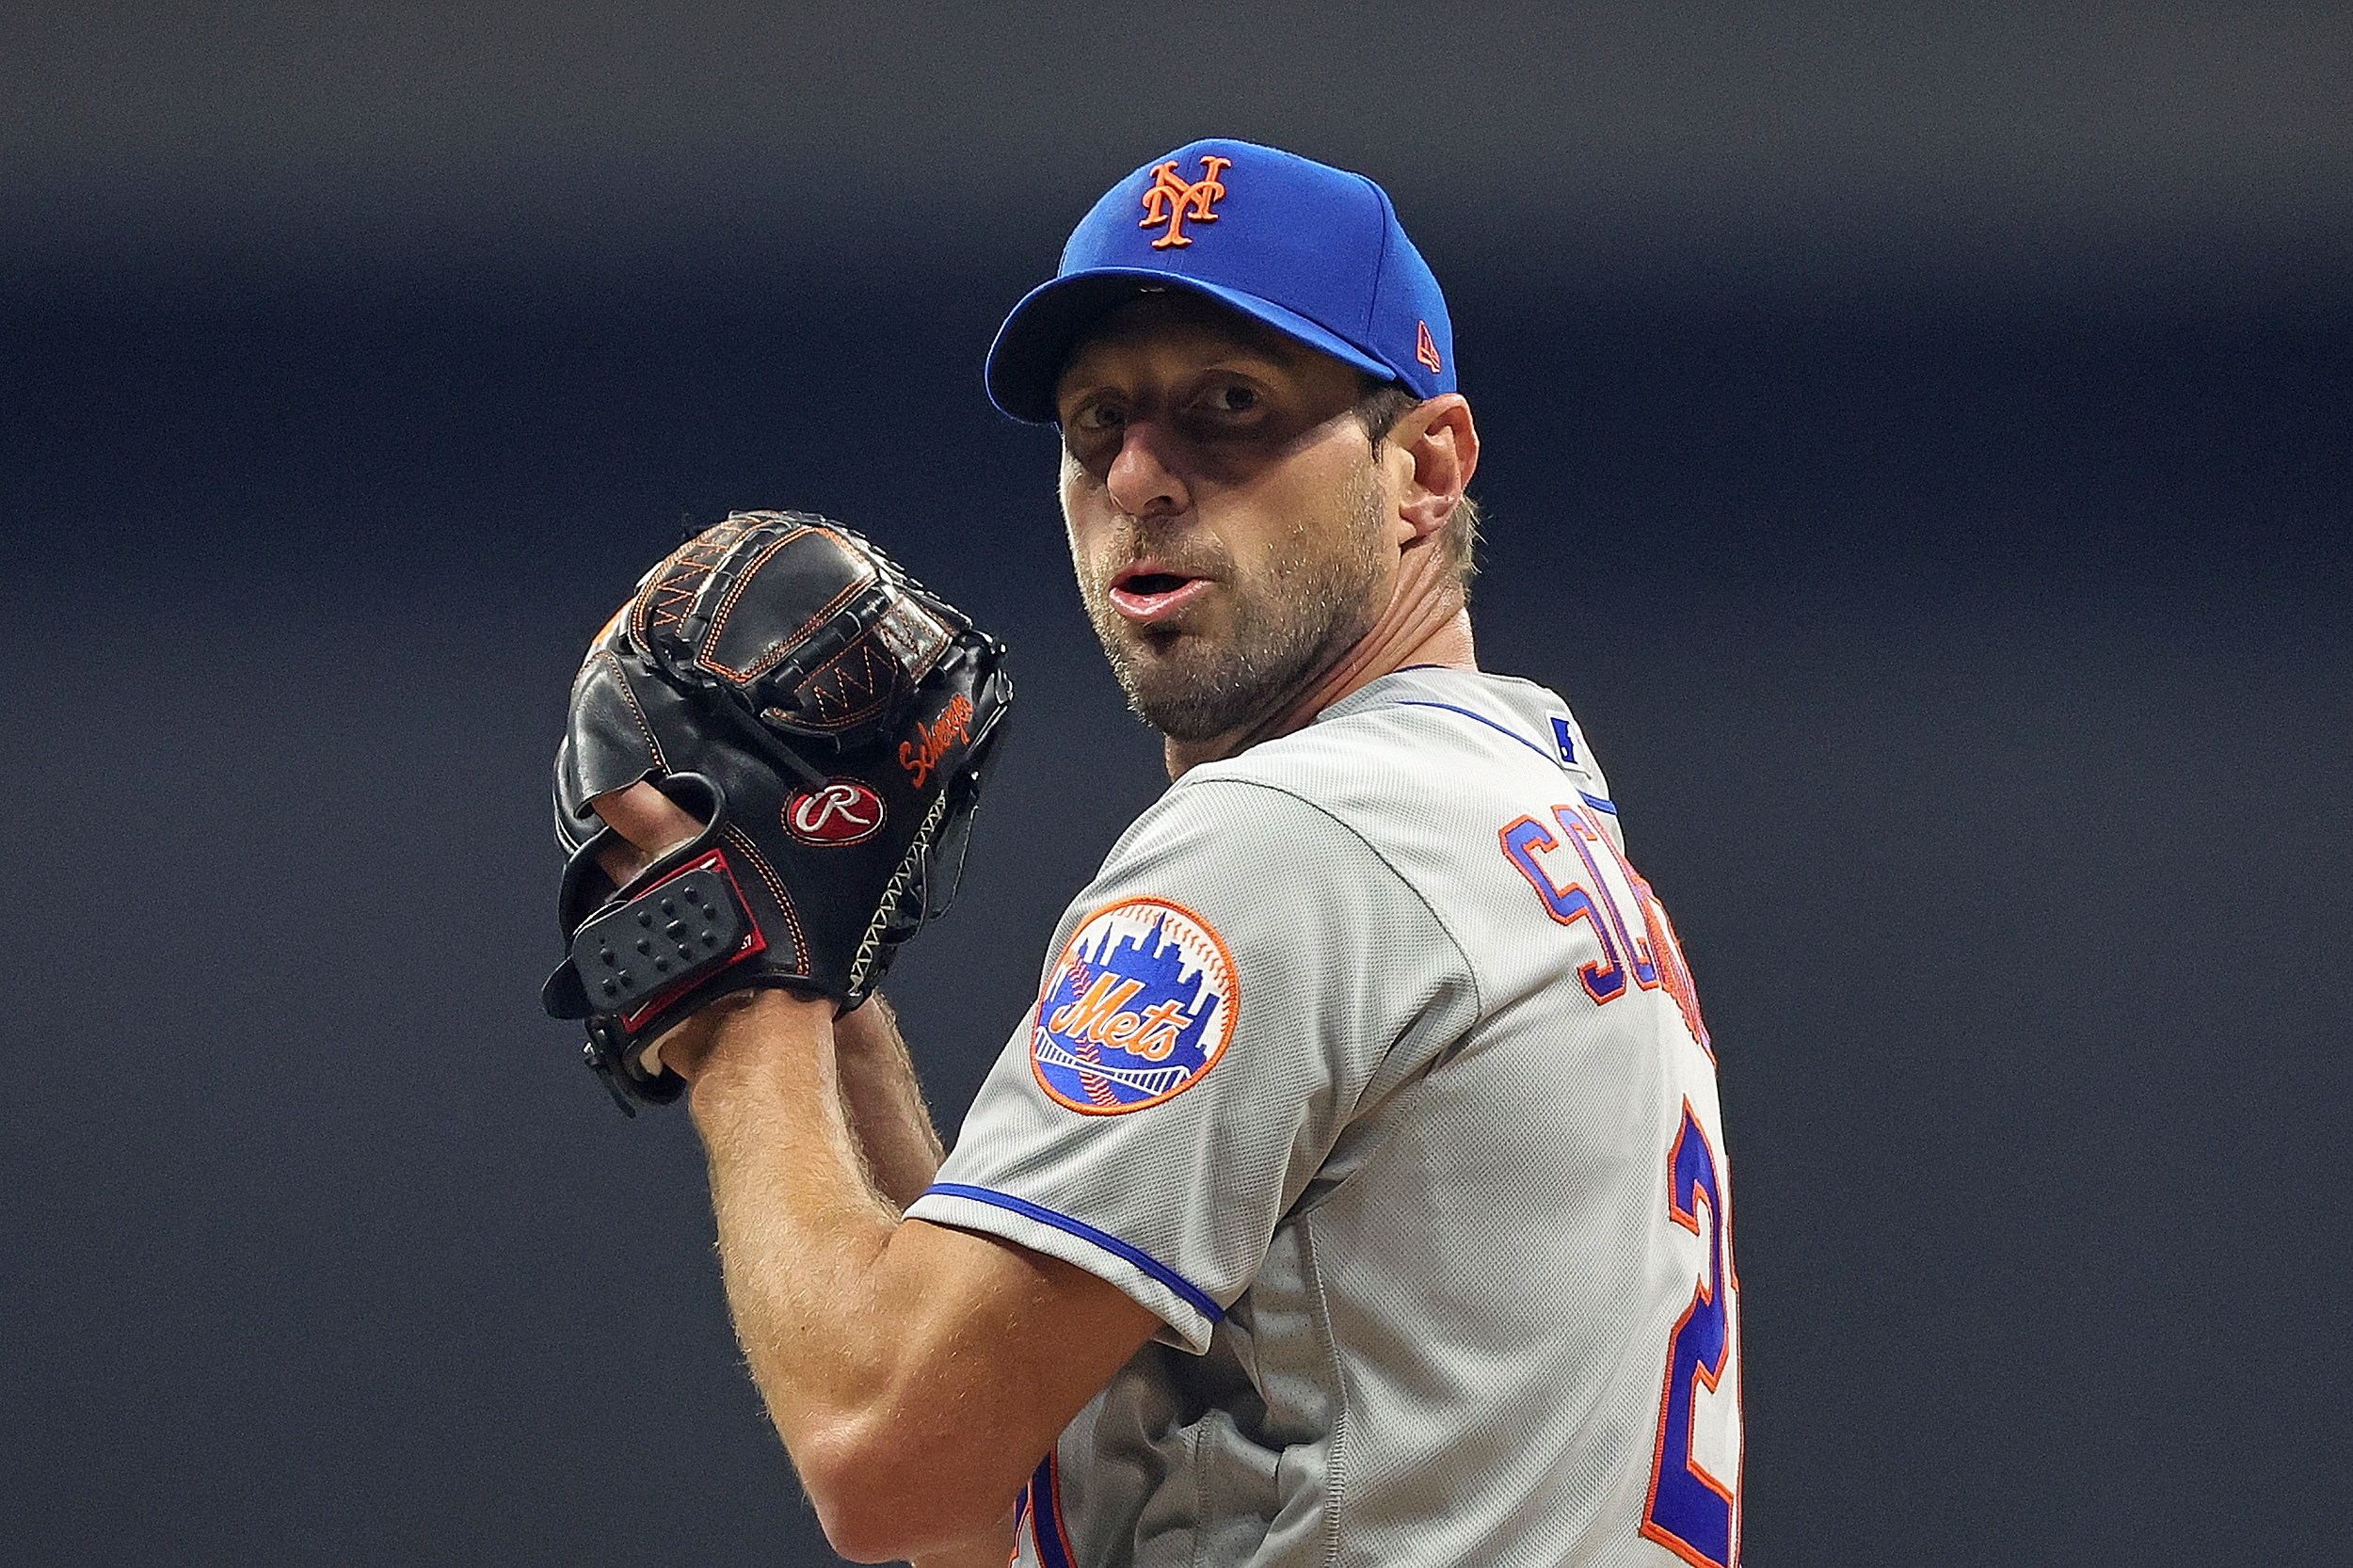 Max Scherzer: What he thinks of joining Jacob deGrom, NY Mets